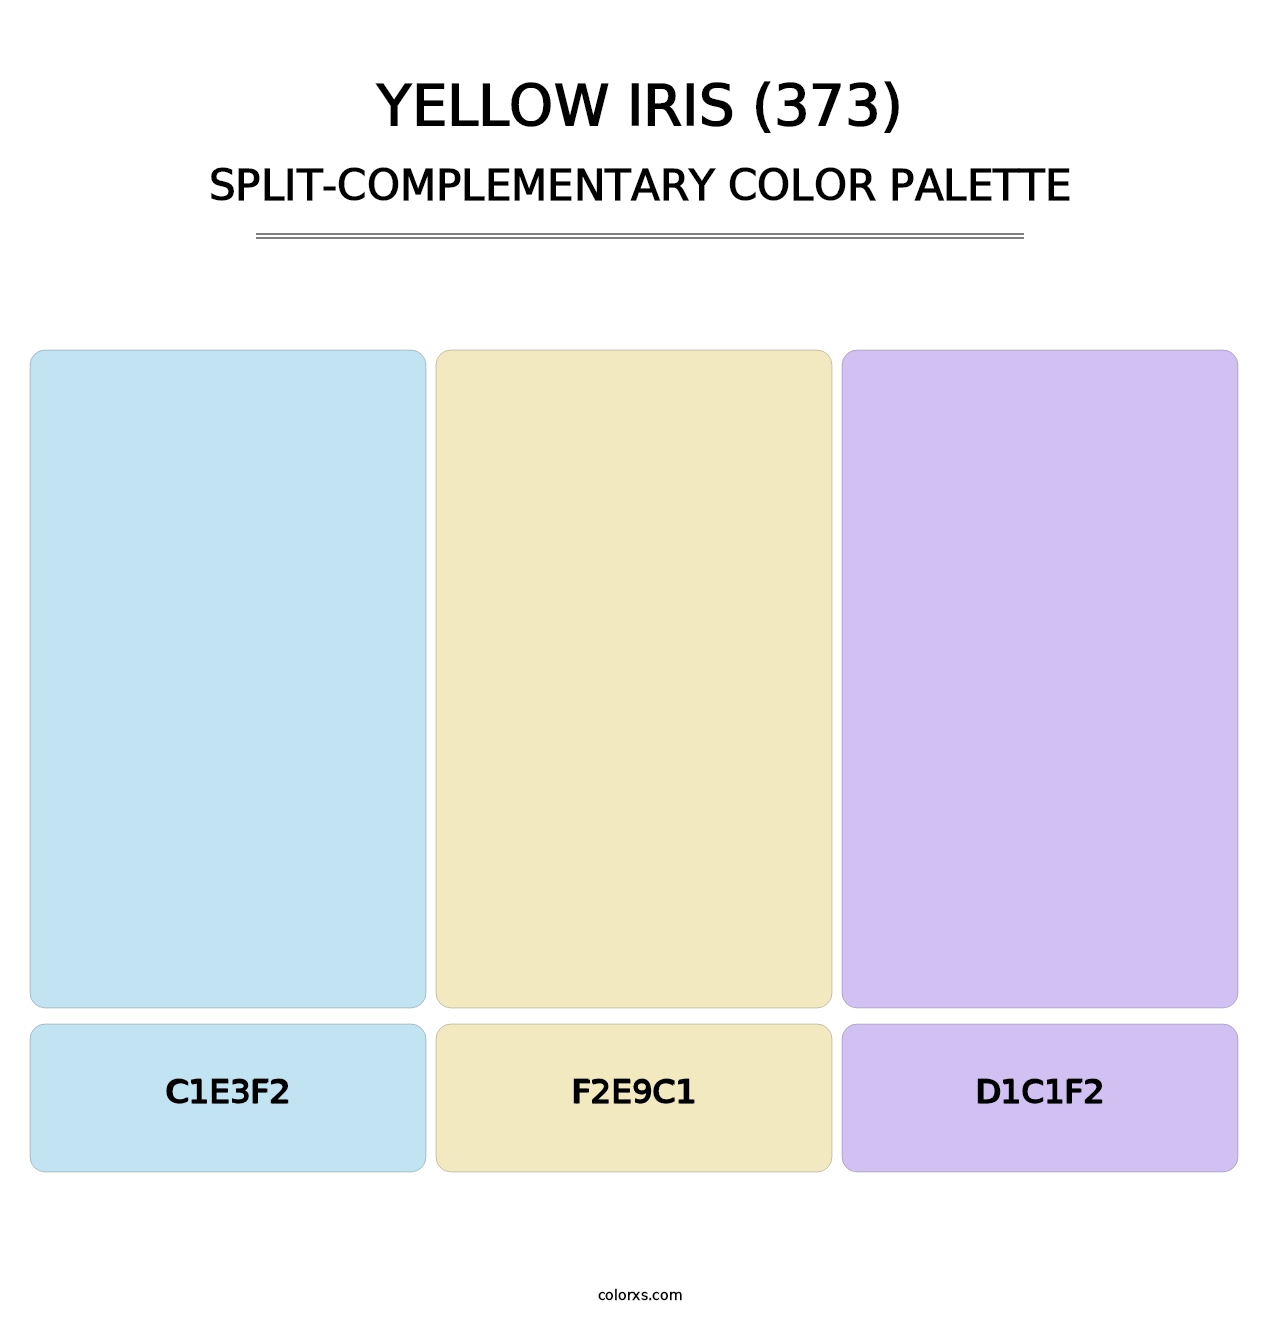 Yellow Iris (373) - Split-Complementary Color Palette